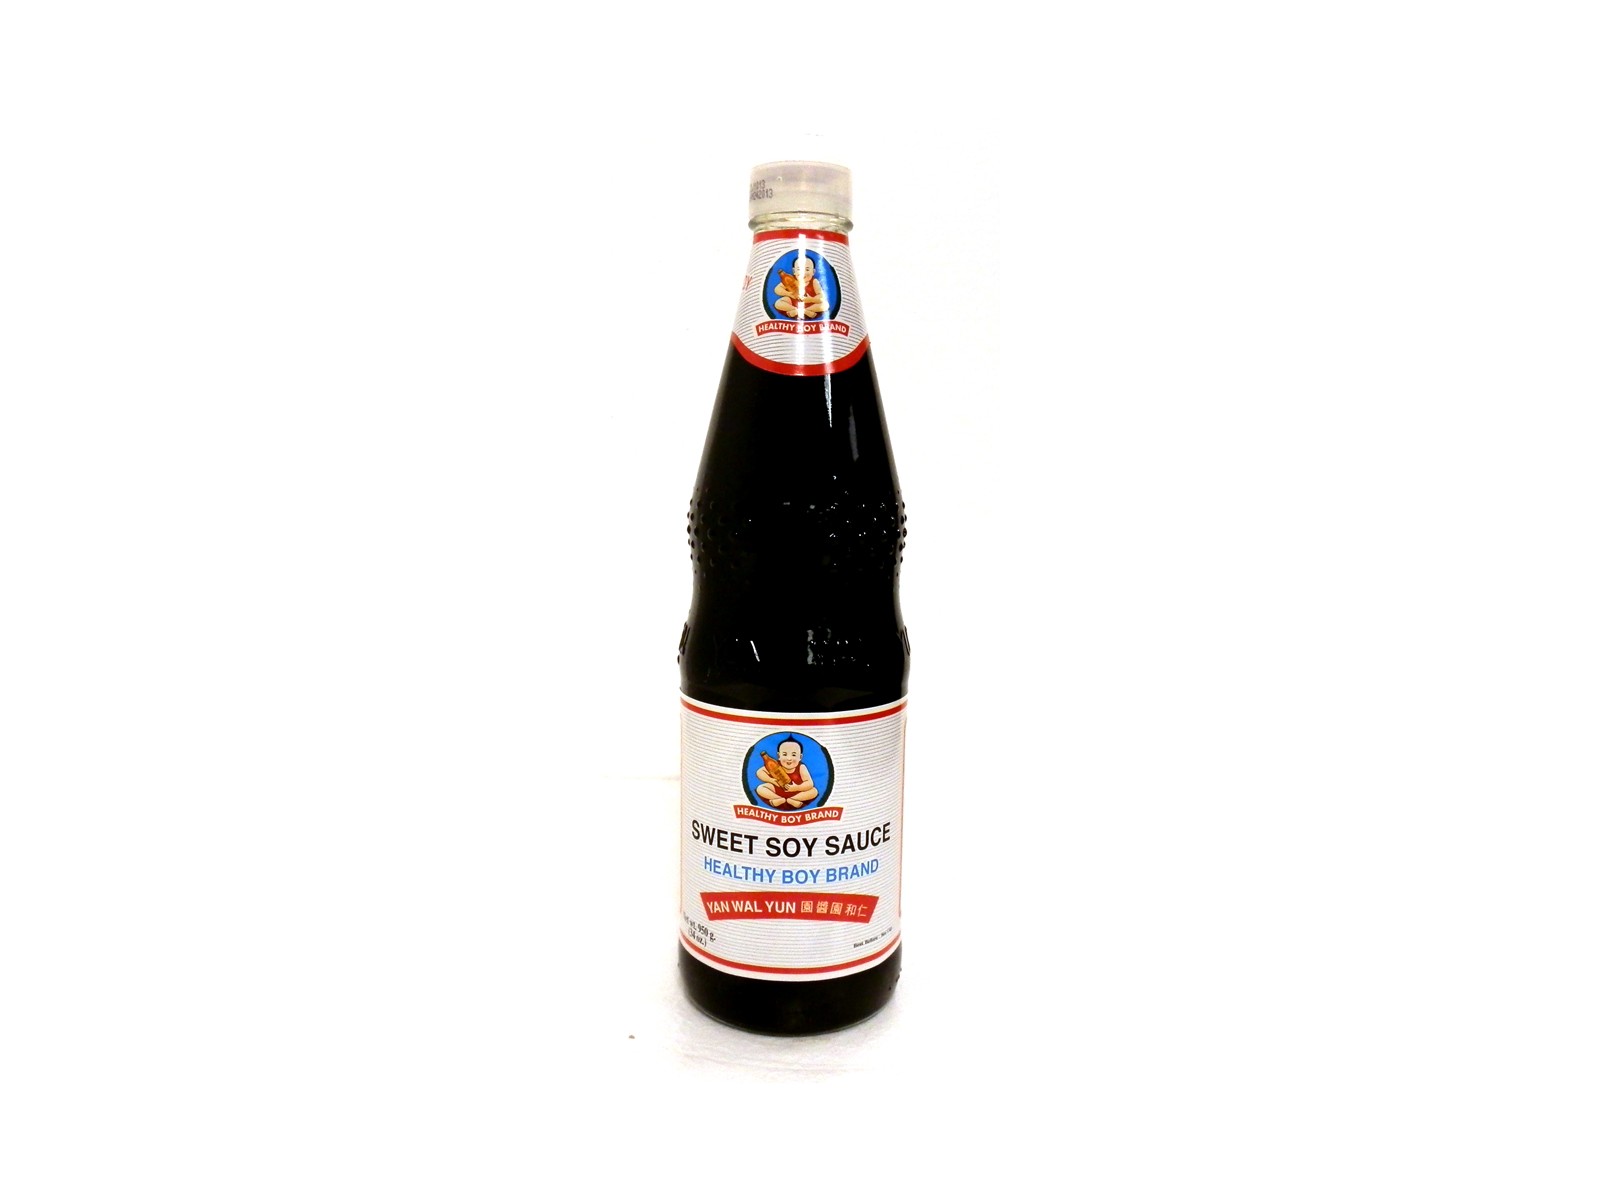 Healthy Boy Sweet Soy Sauce 700ml - Soy Sauce & Fish Sauce | Sing Kee